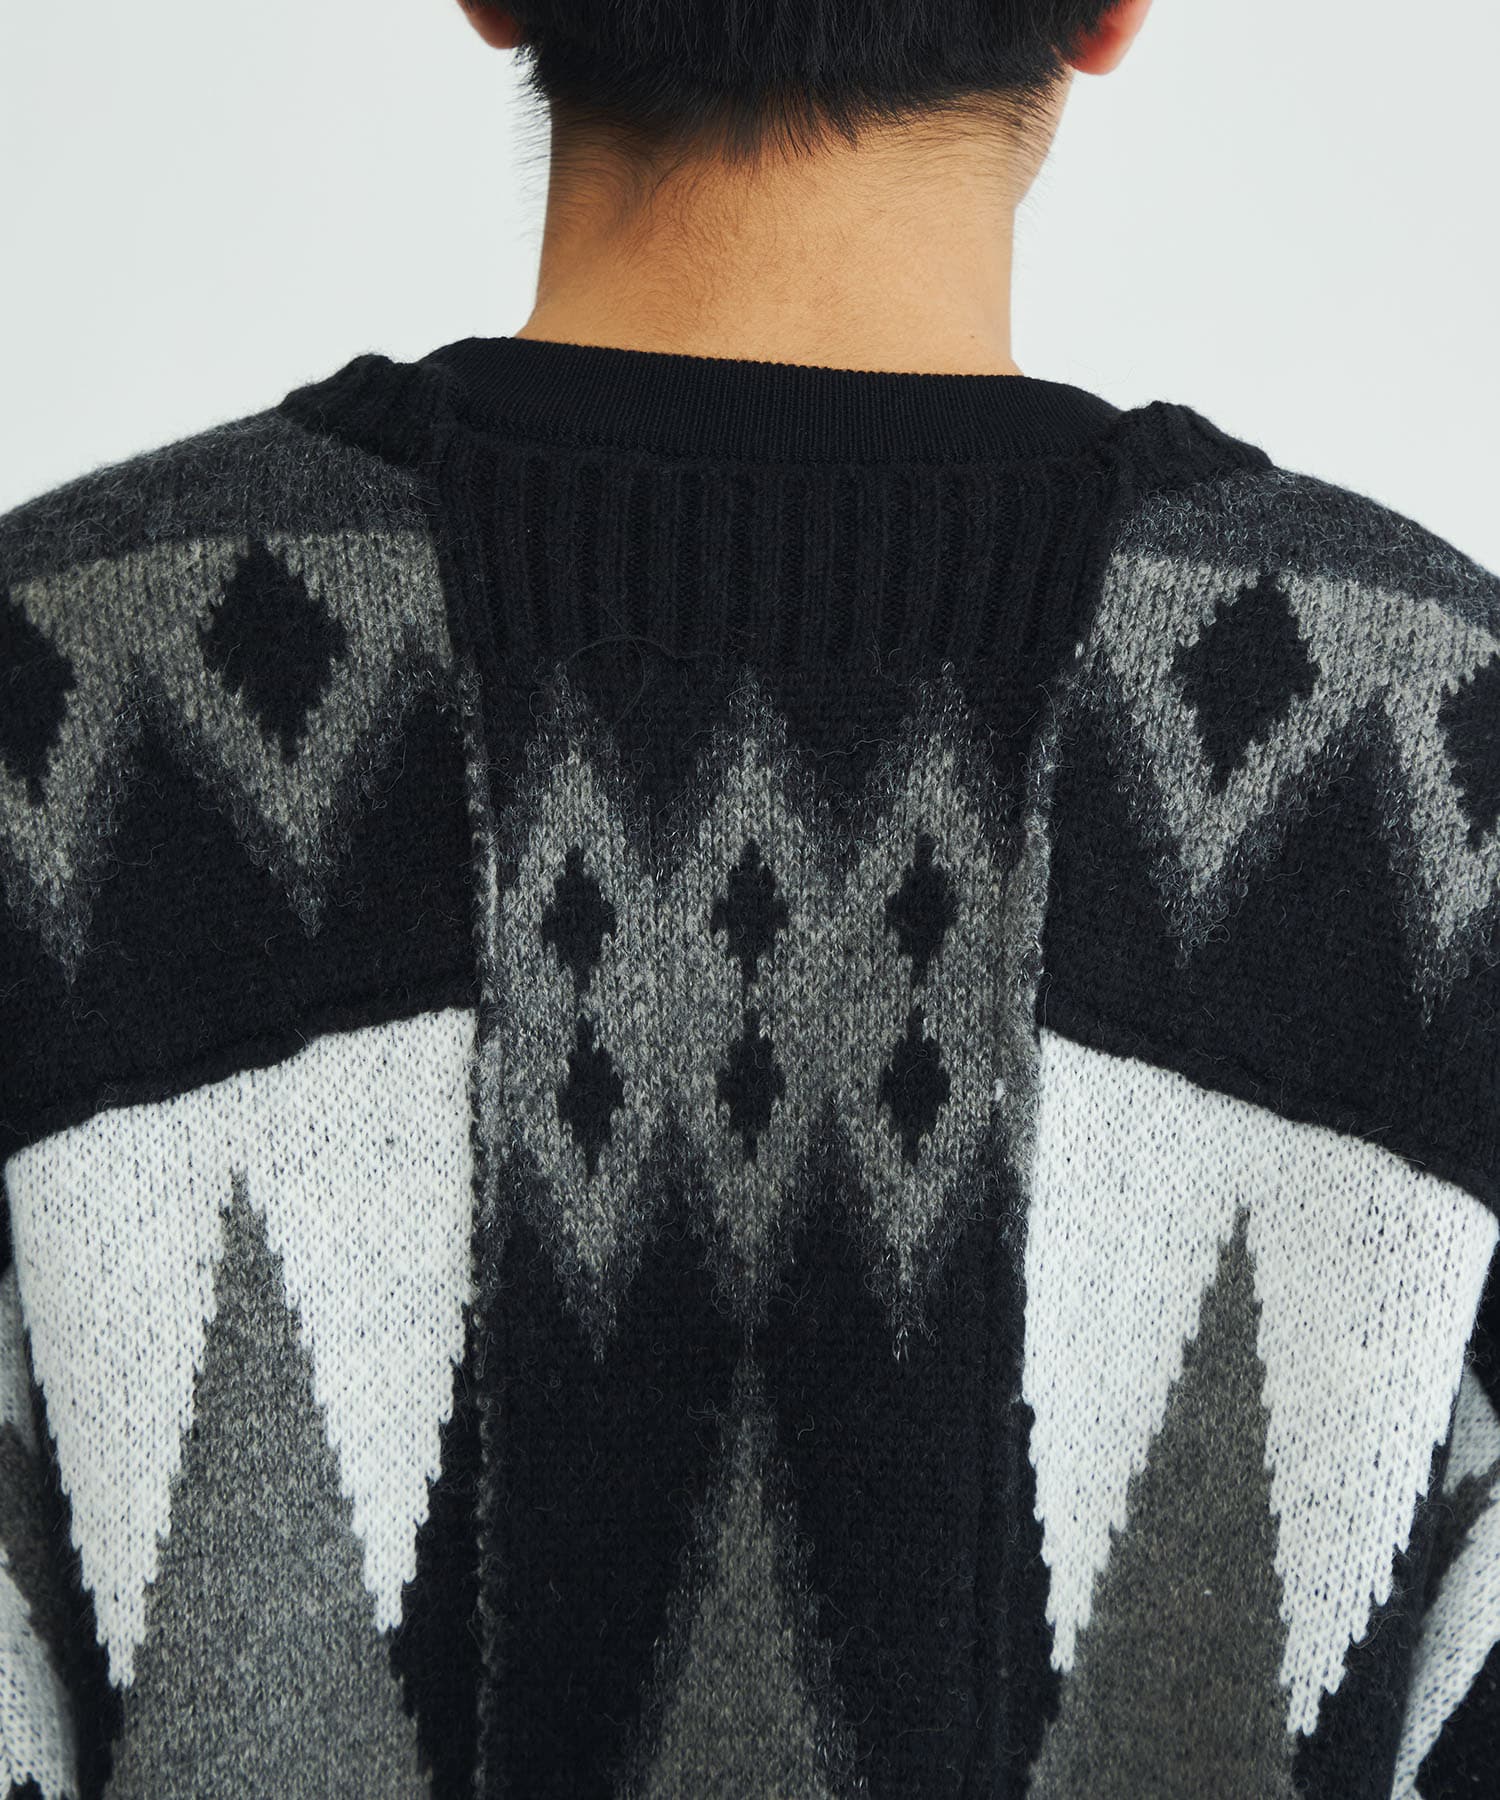 CREW NECK SWEATER TOWNCRAFT WHITE LABEL